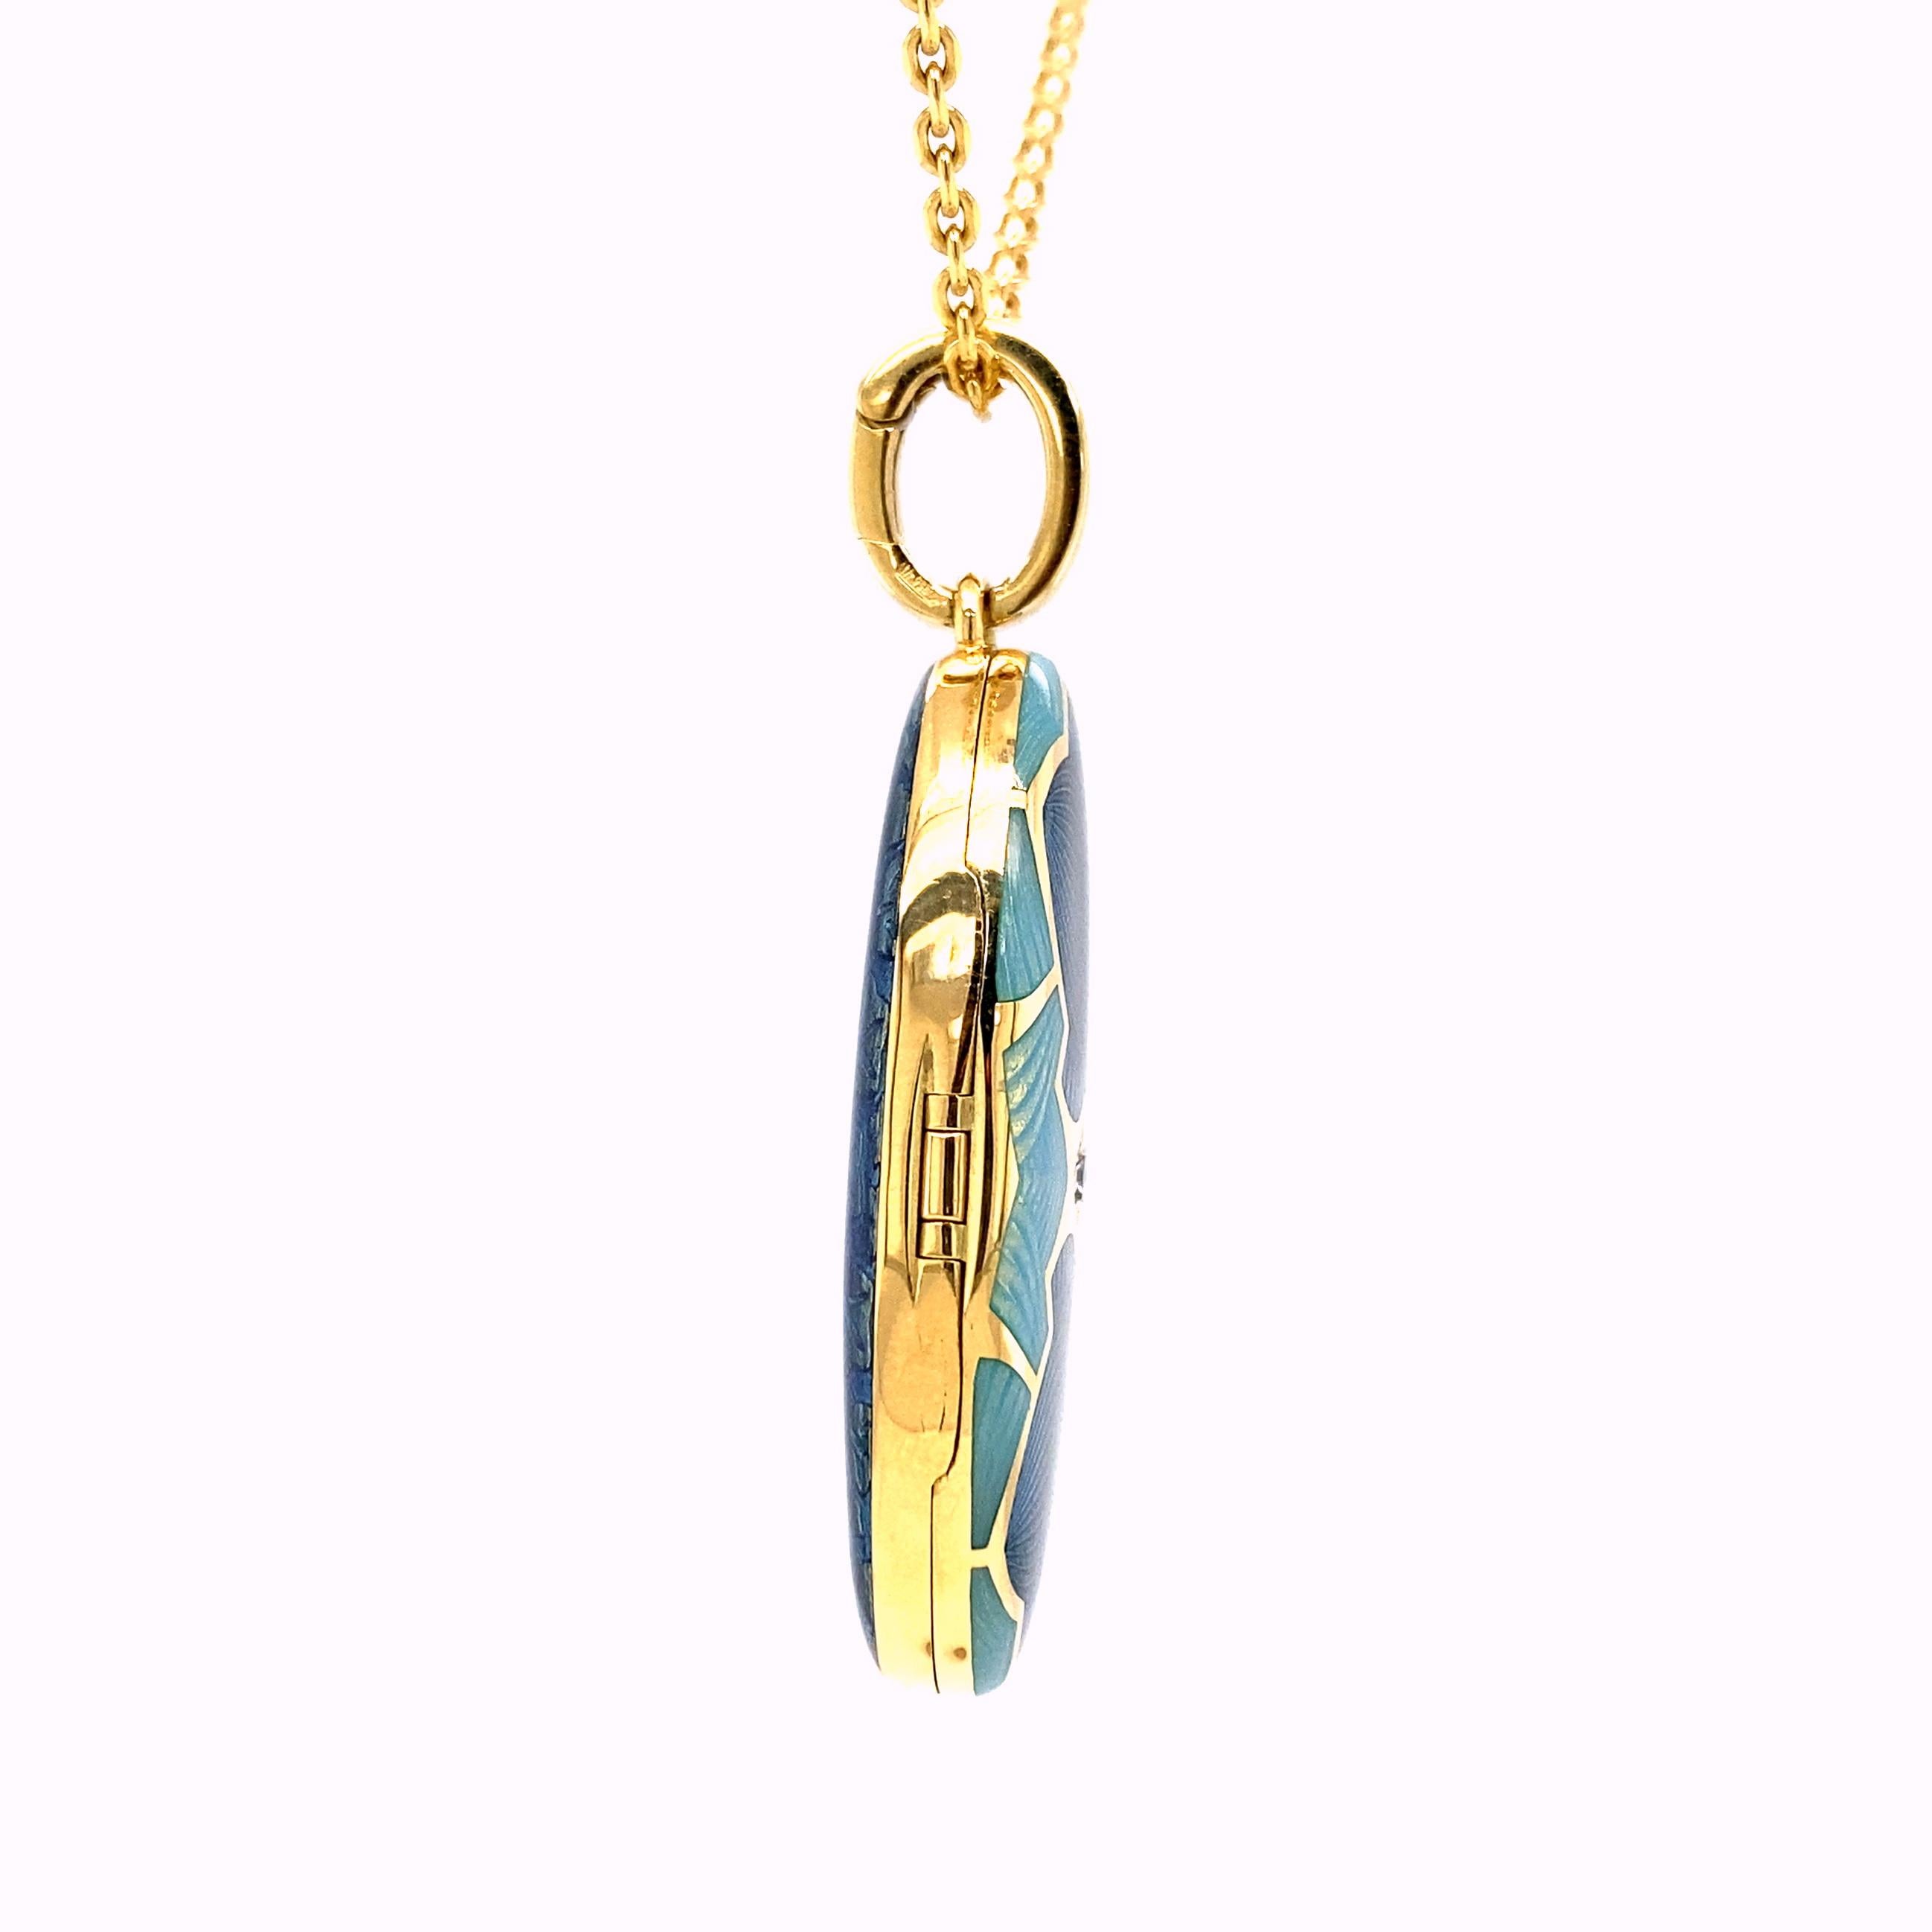 Contemporary Oval Locket Pendant Necklace 18k Yellow Gold Blue/Turqouise Enamel Diamond 0.1ct For Sale